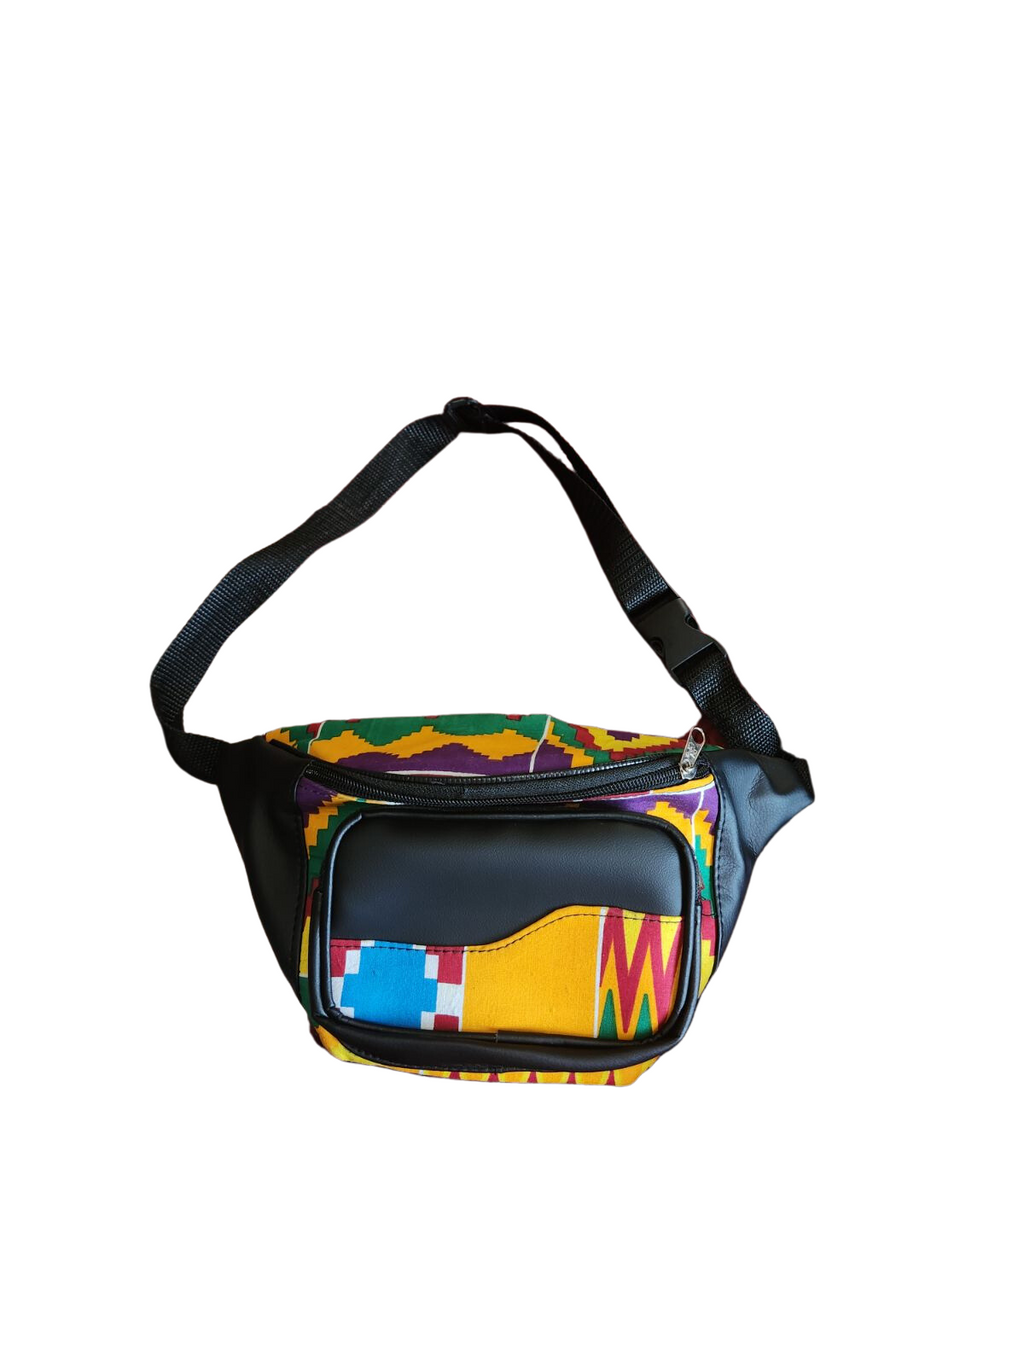 African Fanny Pack